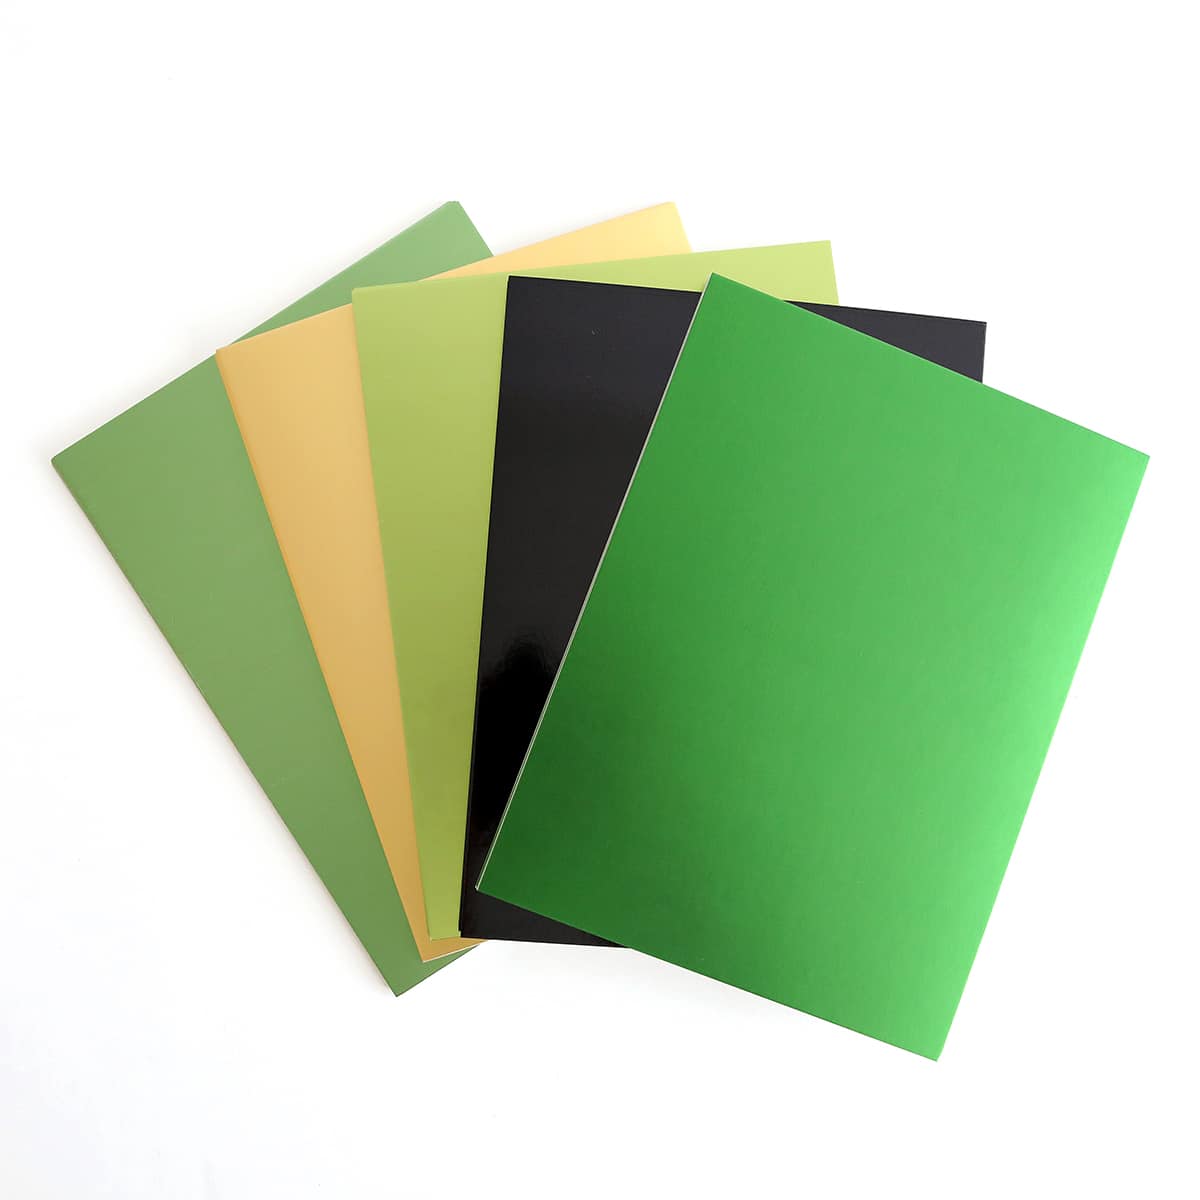 a stack of different colors of paper on a white surface.